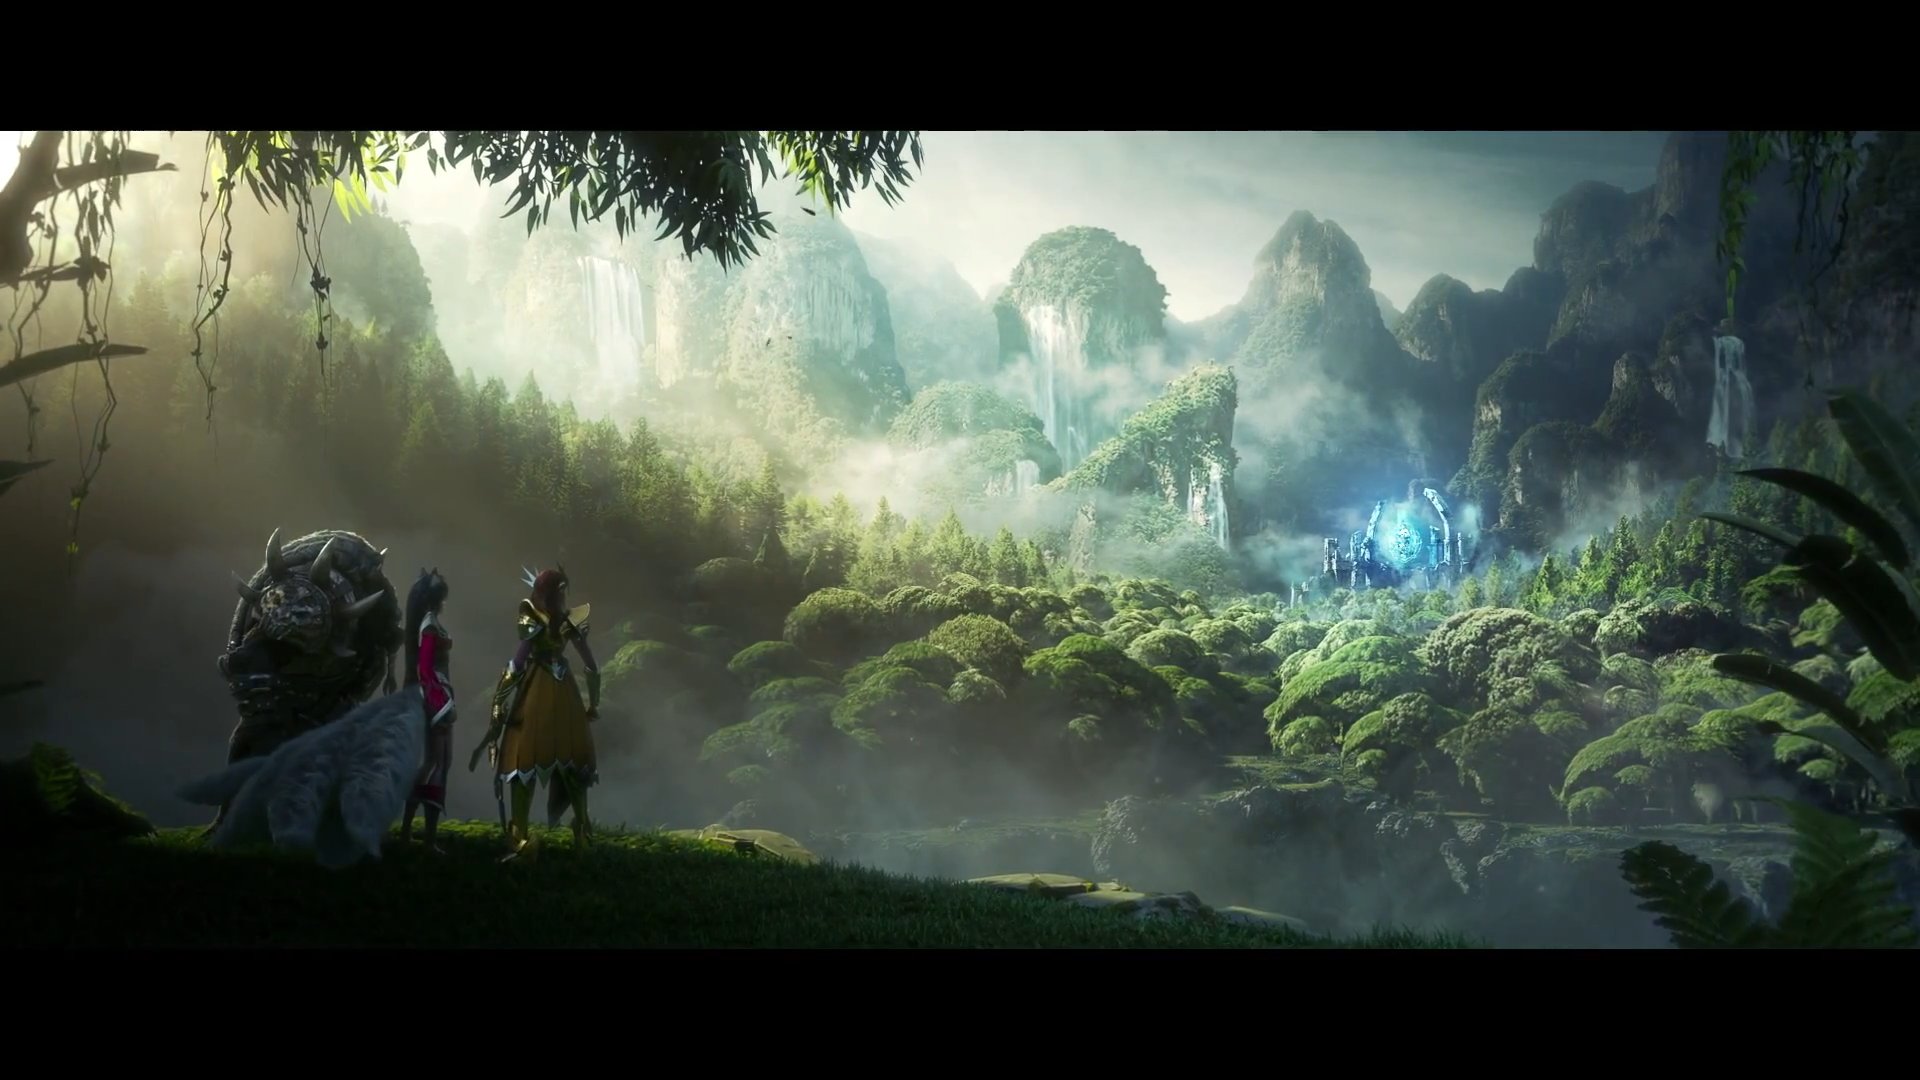 League of Legends Cinematic: A New Dawn – Behind the Scenes